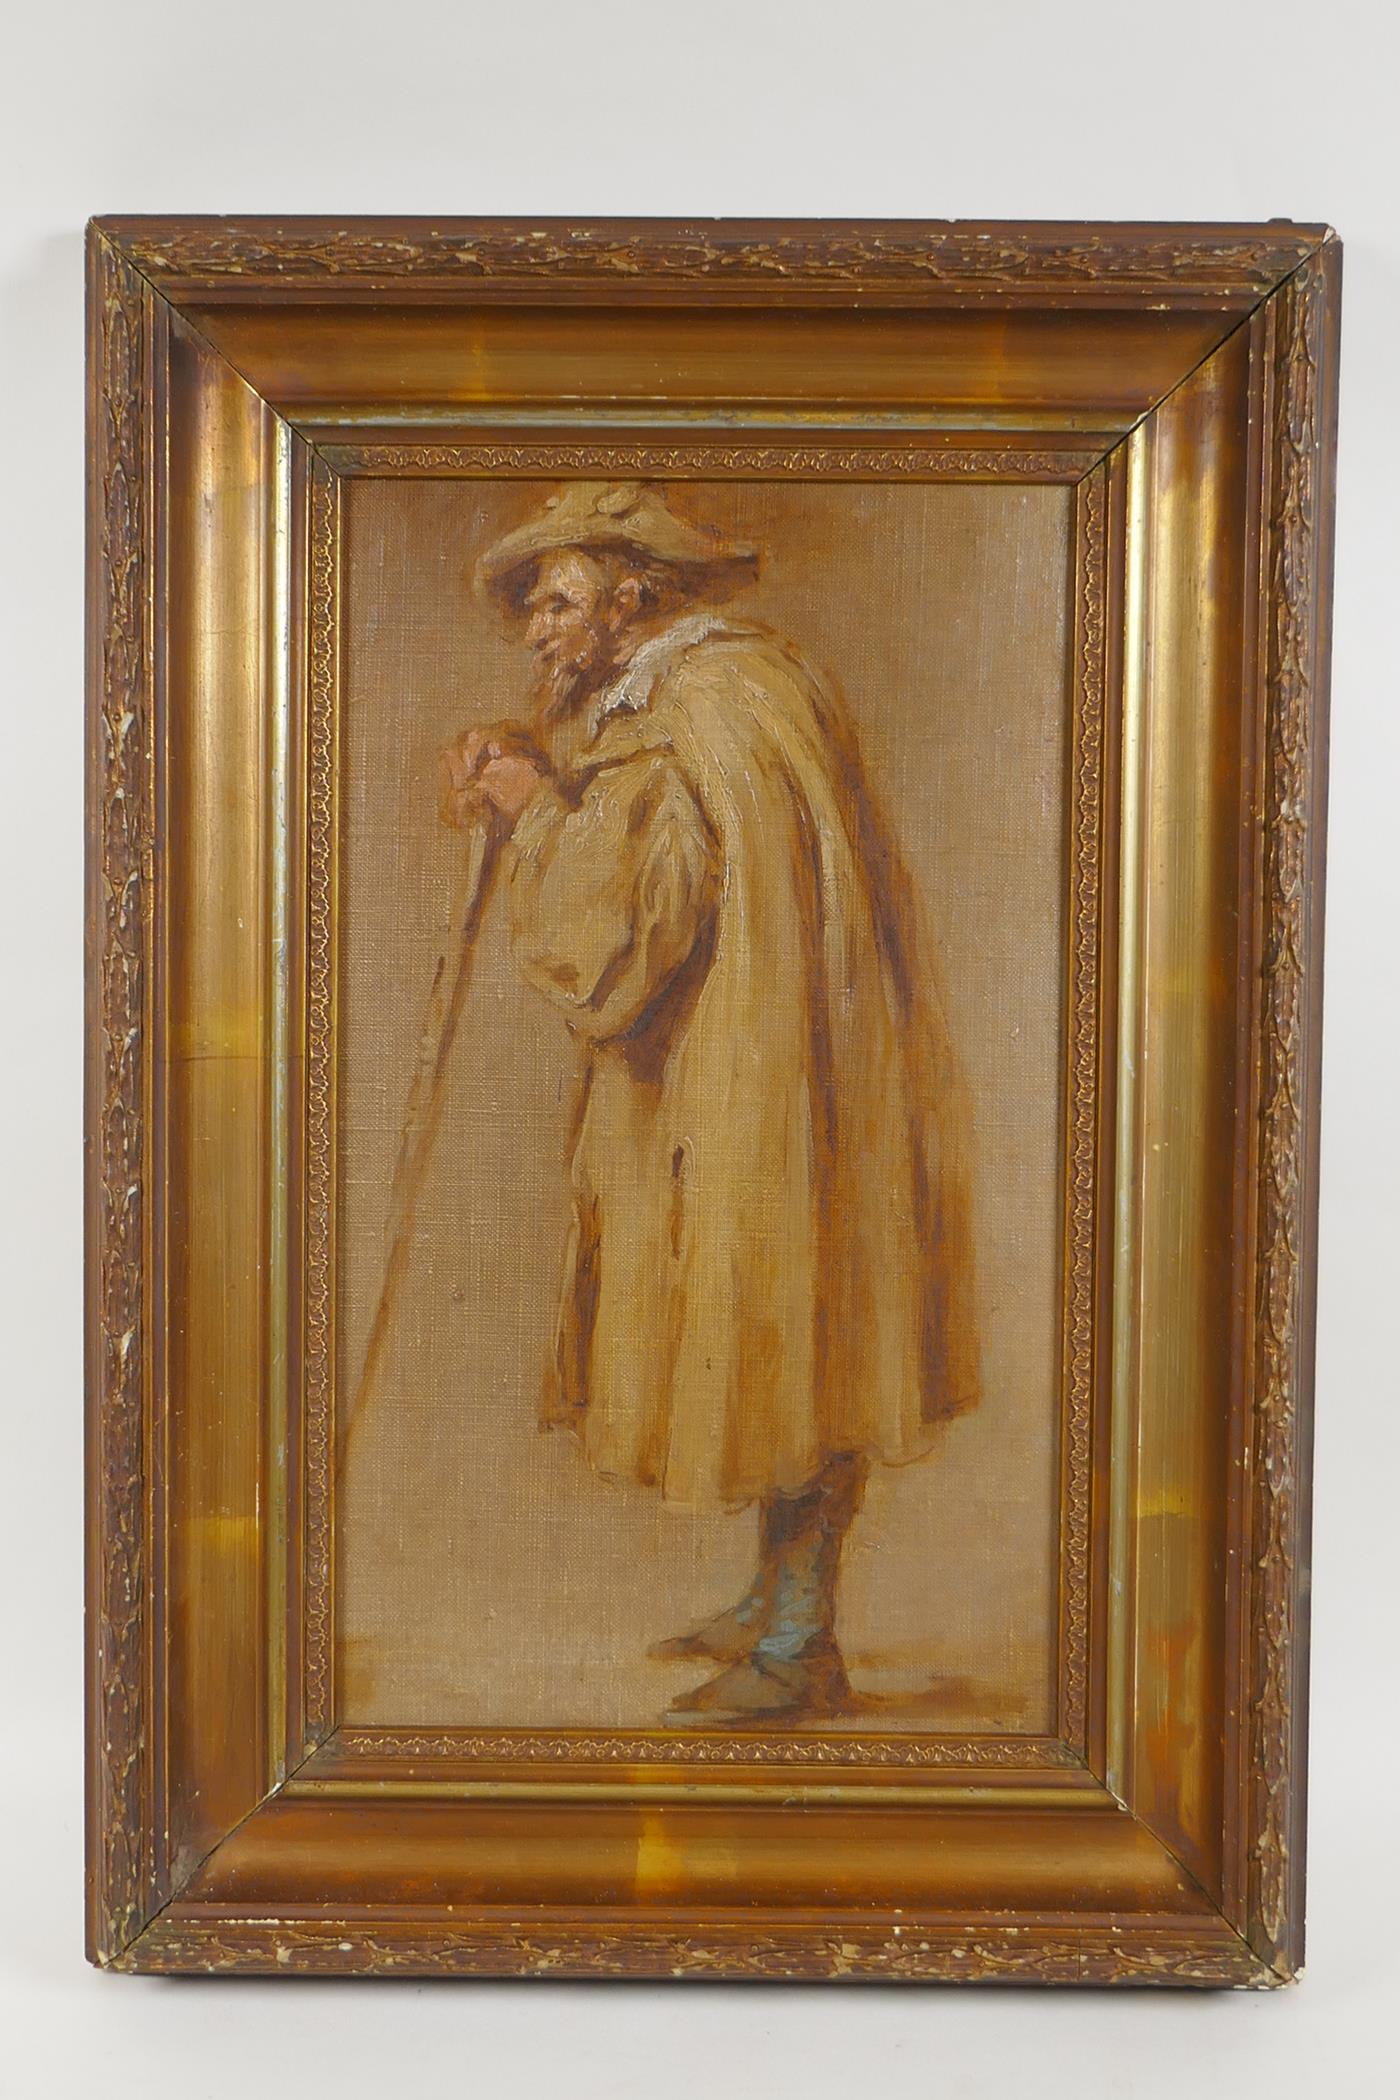 Dutch School, portrait of a man in a cloak, antique oil on canvas laid on board, 33 x 19cm - Image 2 of 3